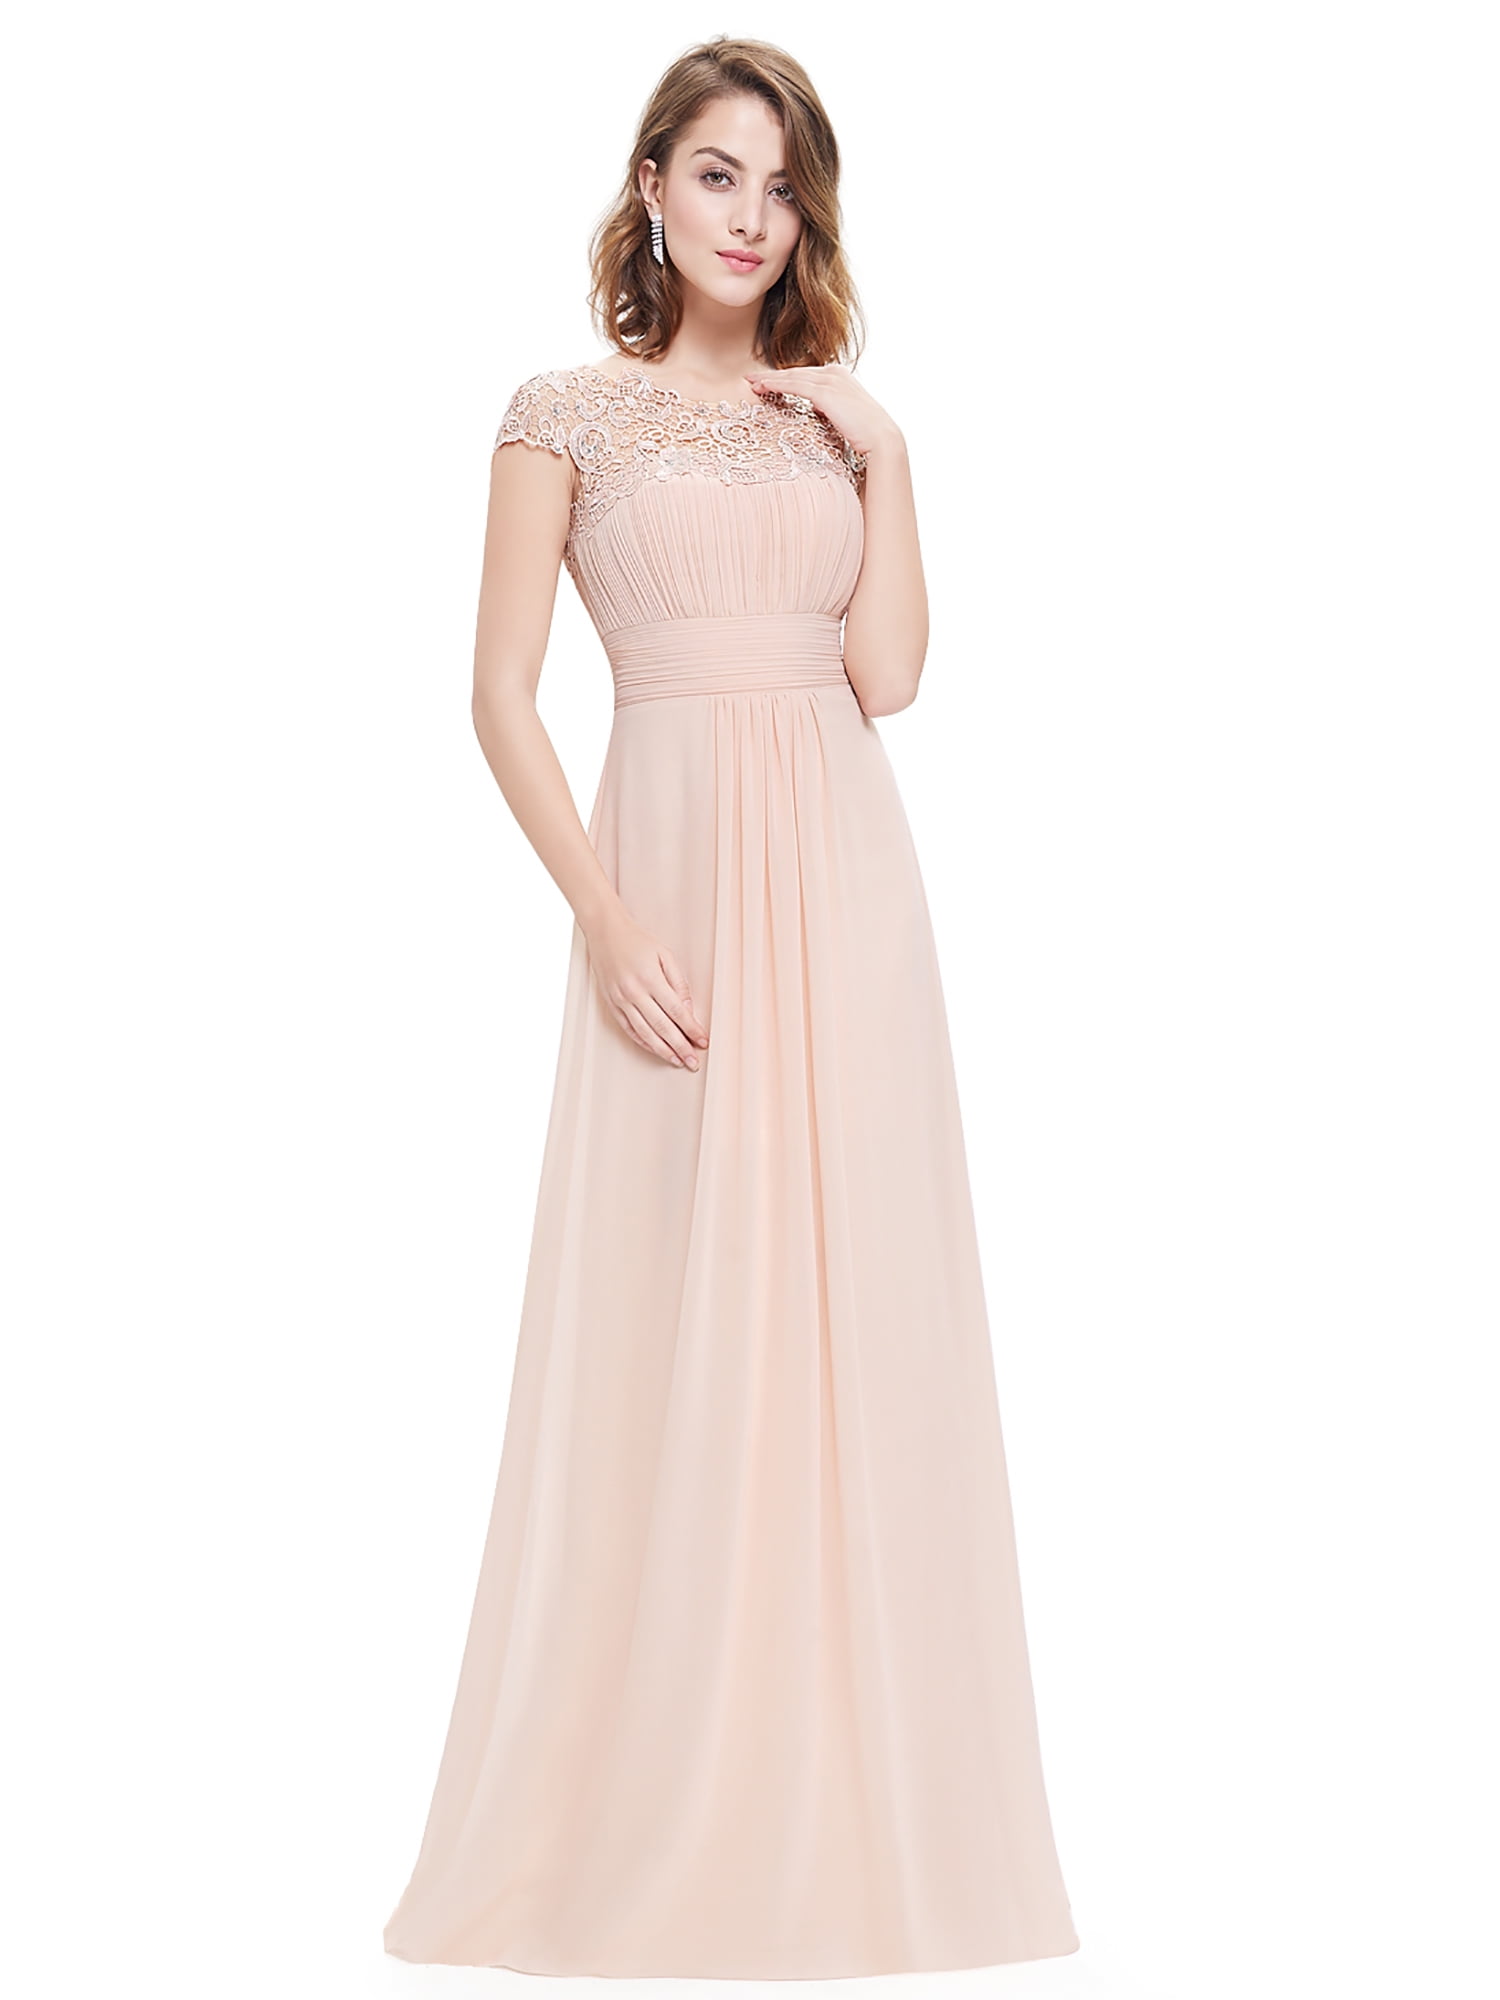 Ever-Pretty Women's Sexy Ruched Bust Evening Formal Dresses for Women 09993  Blush US8 - Walmart.com